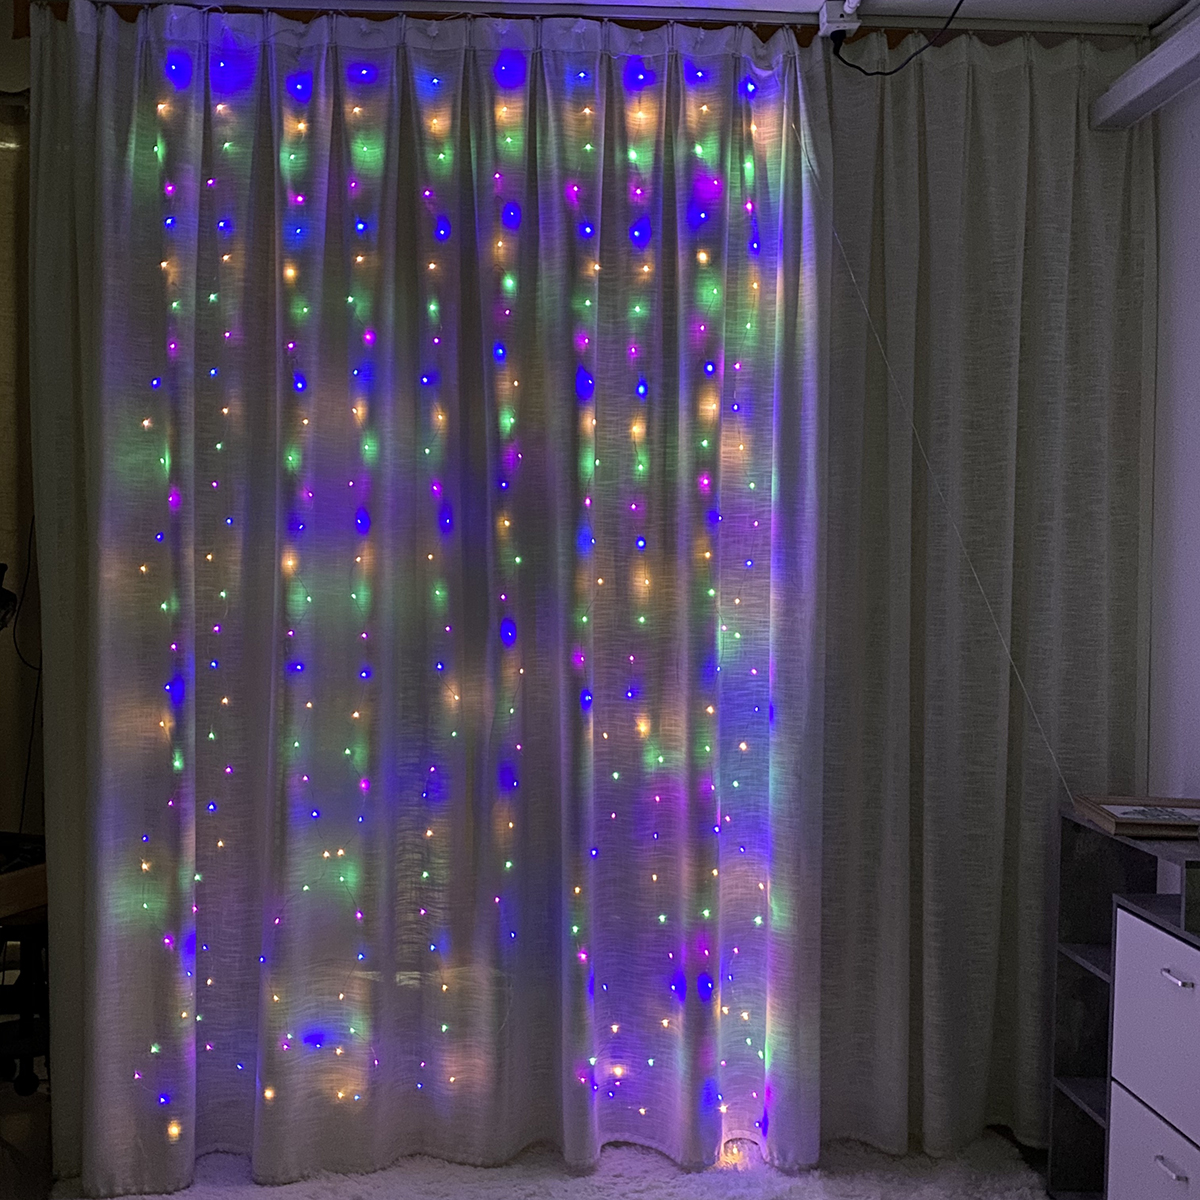 3m2m1m-LED-Curtain-Fairy-Lights-USB-String-Lights-Bedroom-Wedding-Party-Christmas-Tree-Decorations-L-1695518-8